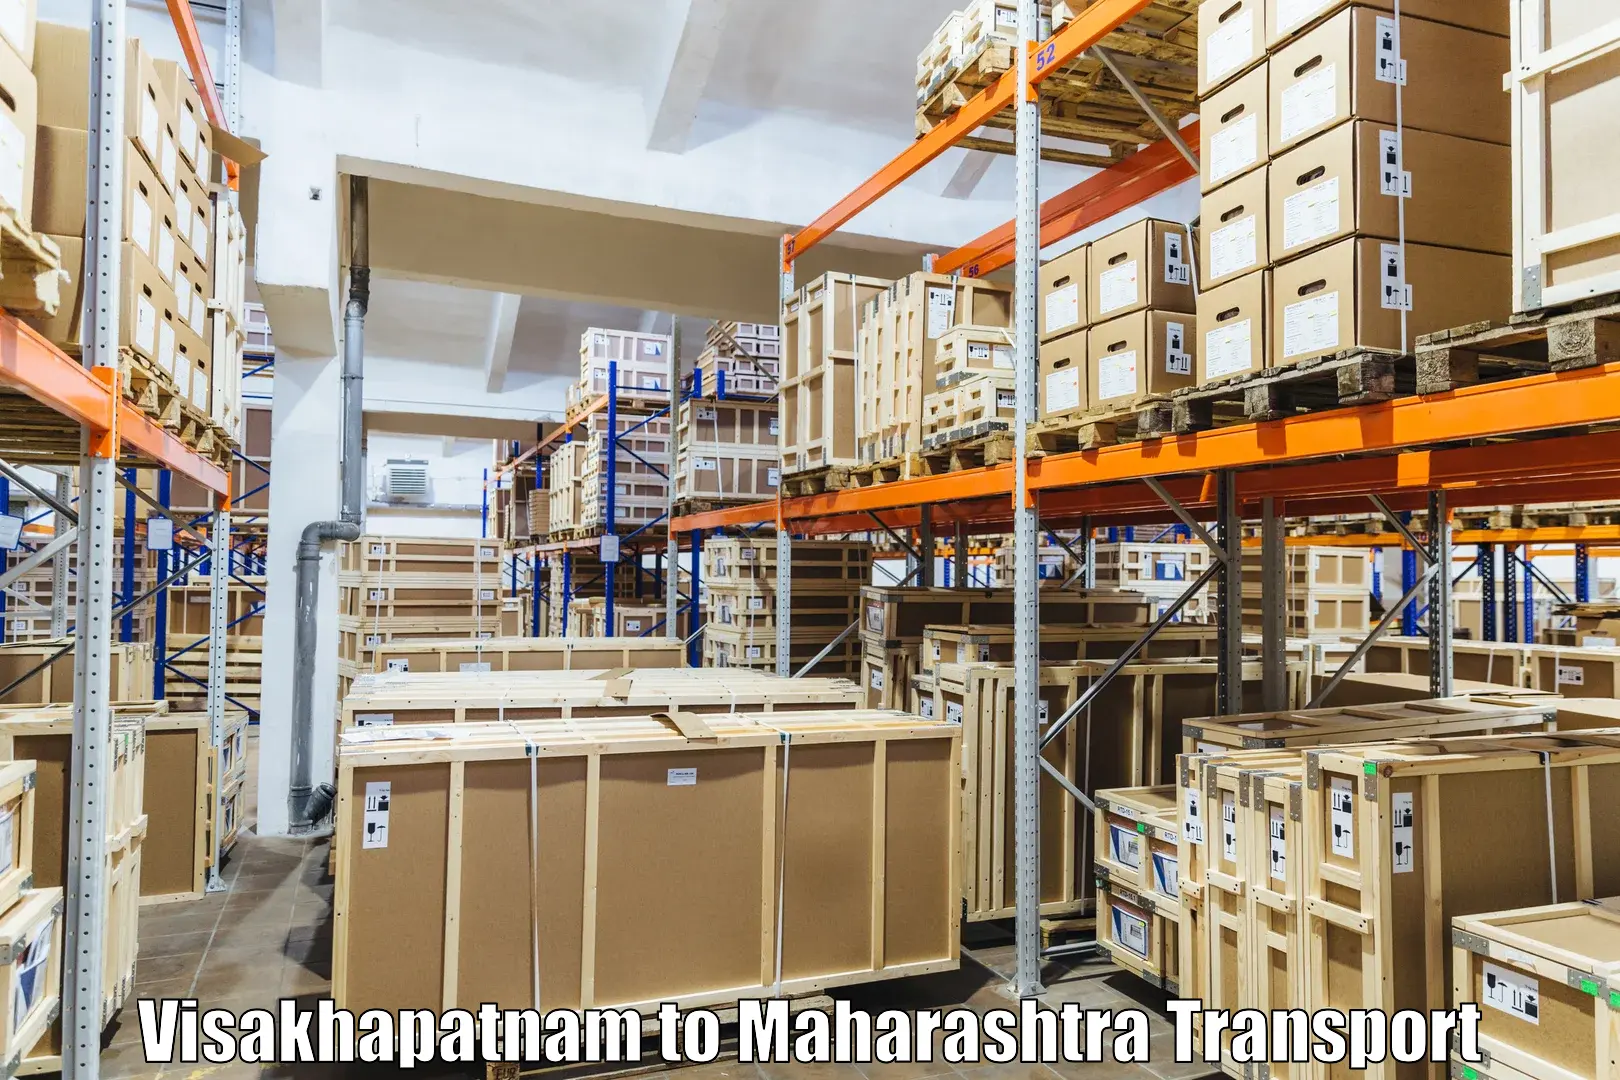 Parcel transport services in Visakhapatnam to Dhule